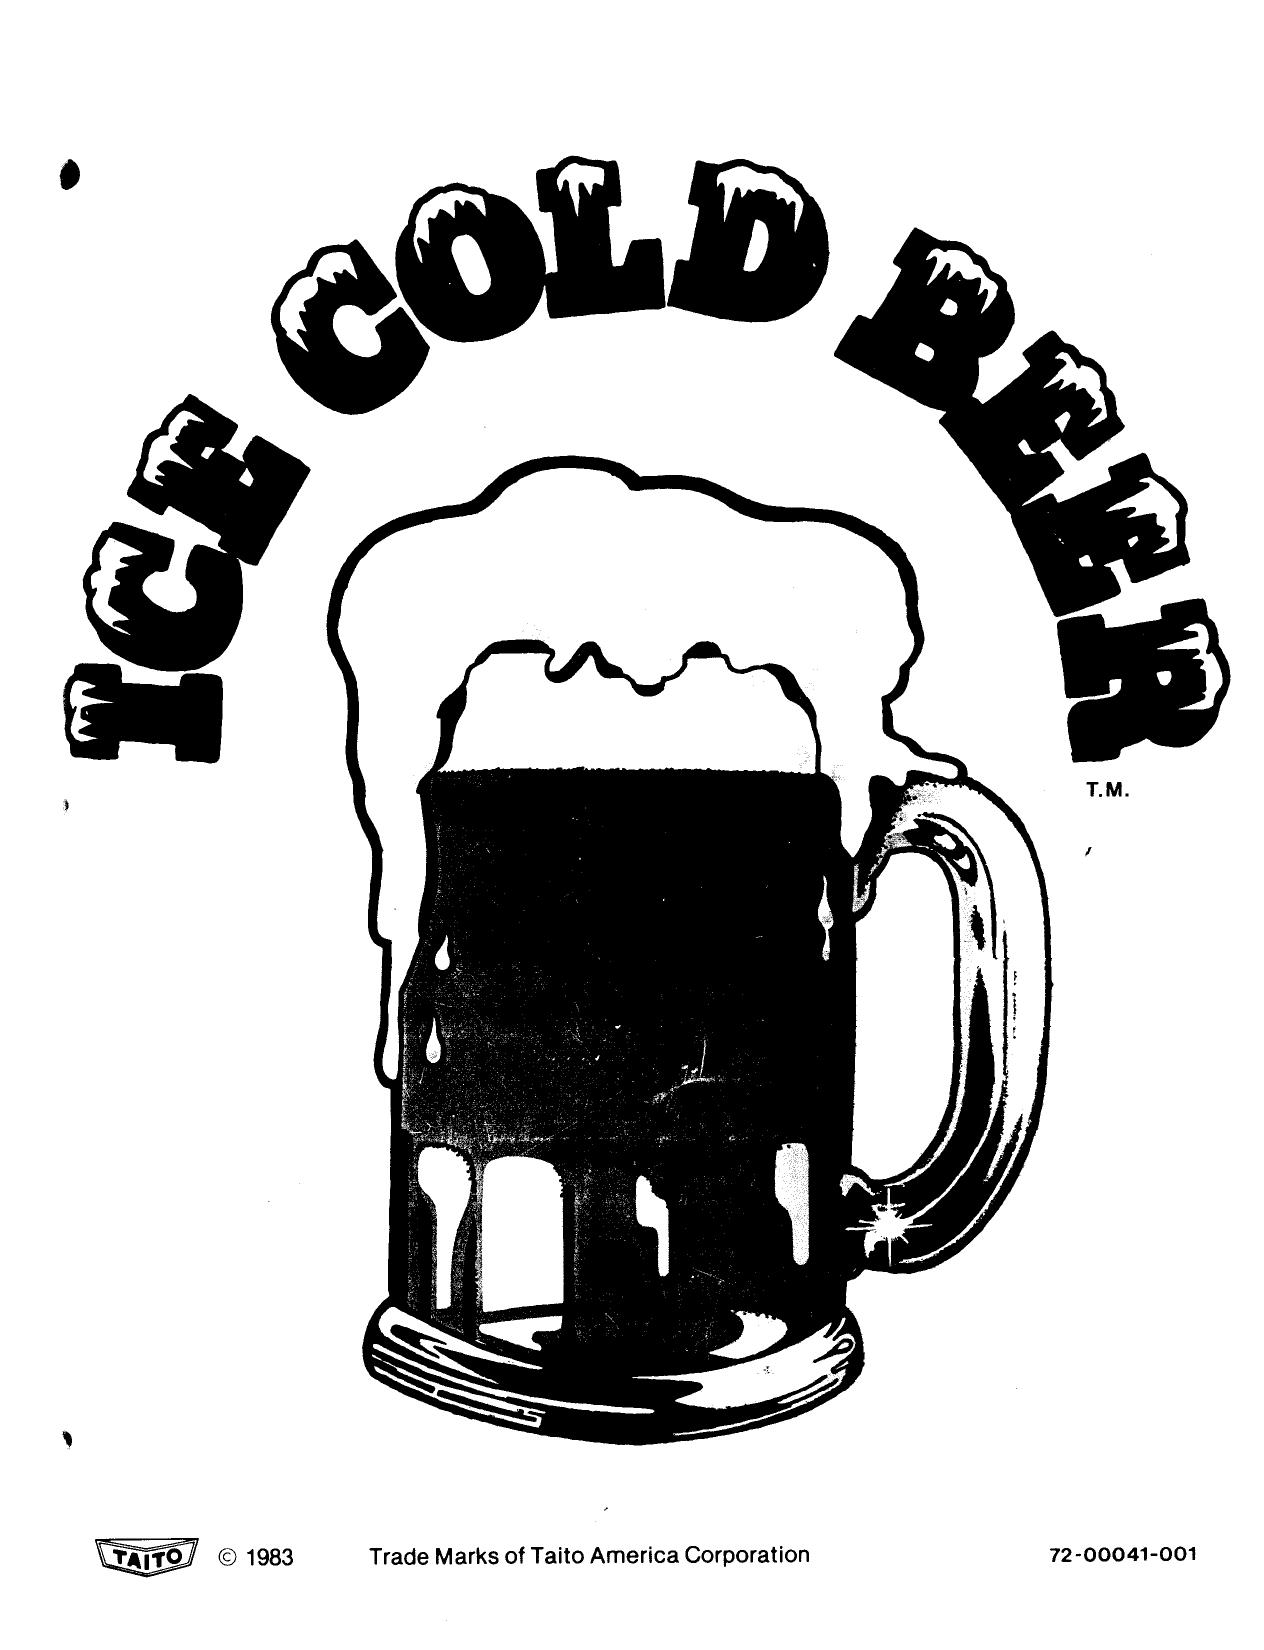 Ice Cold Beer